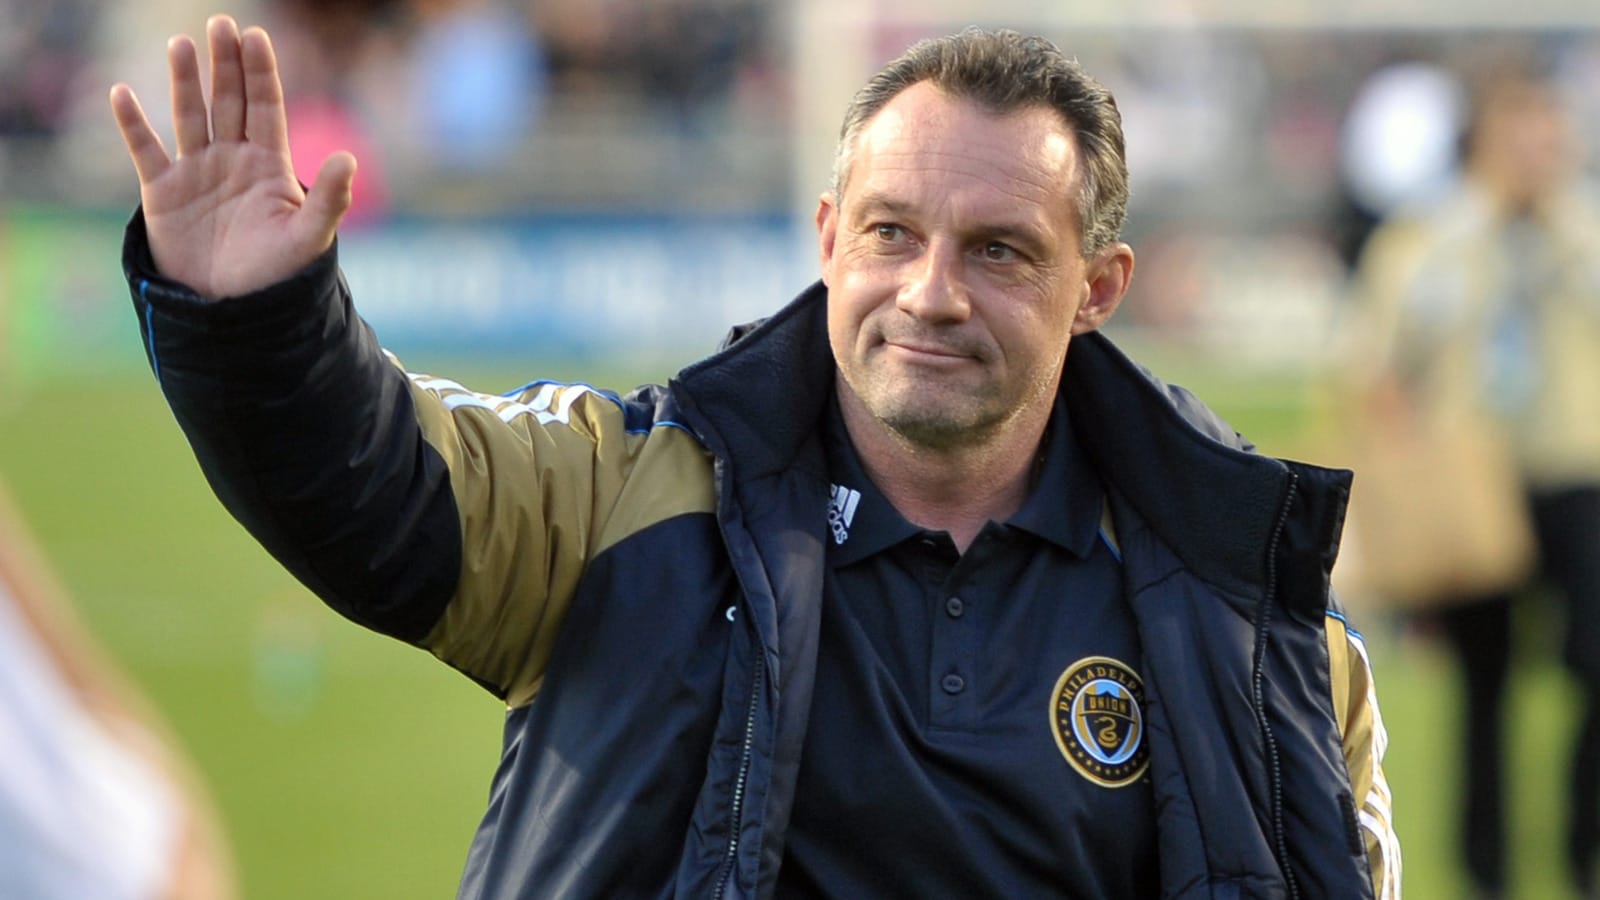 Former MLS coach faces spanking, dehydration allegations